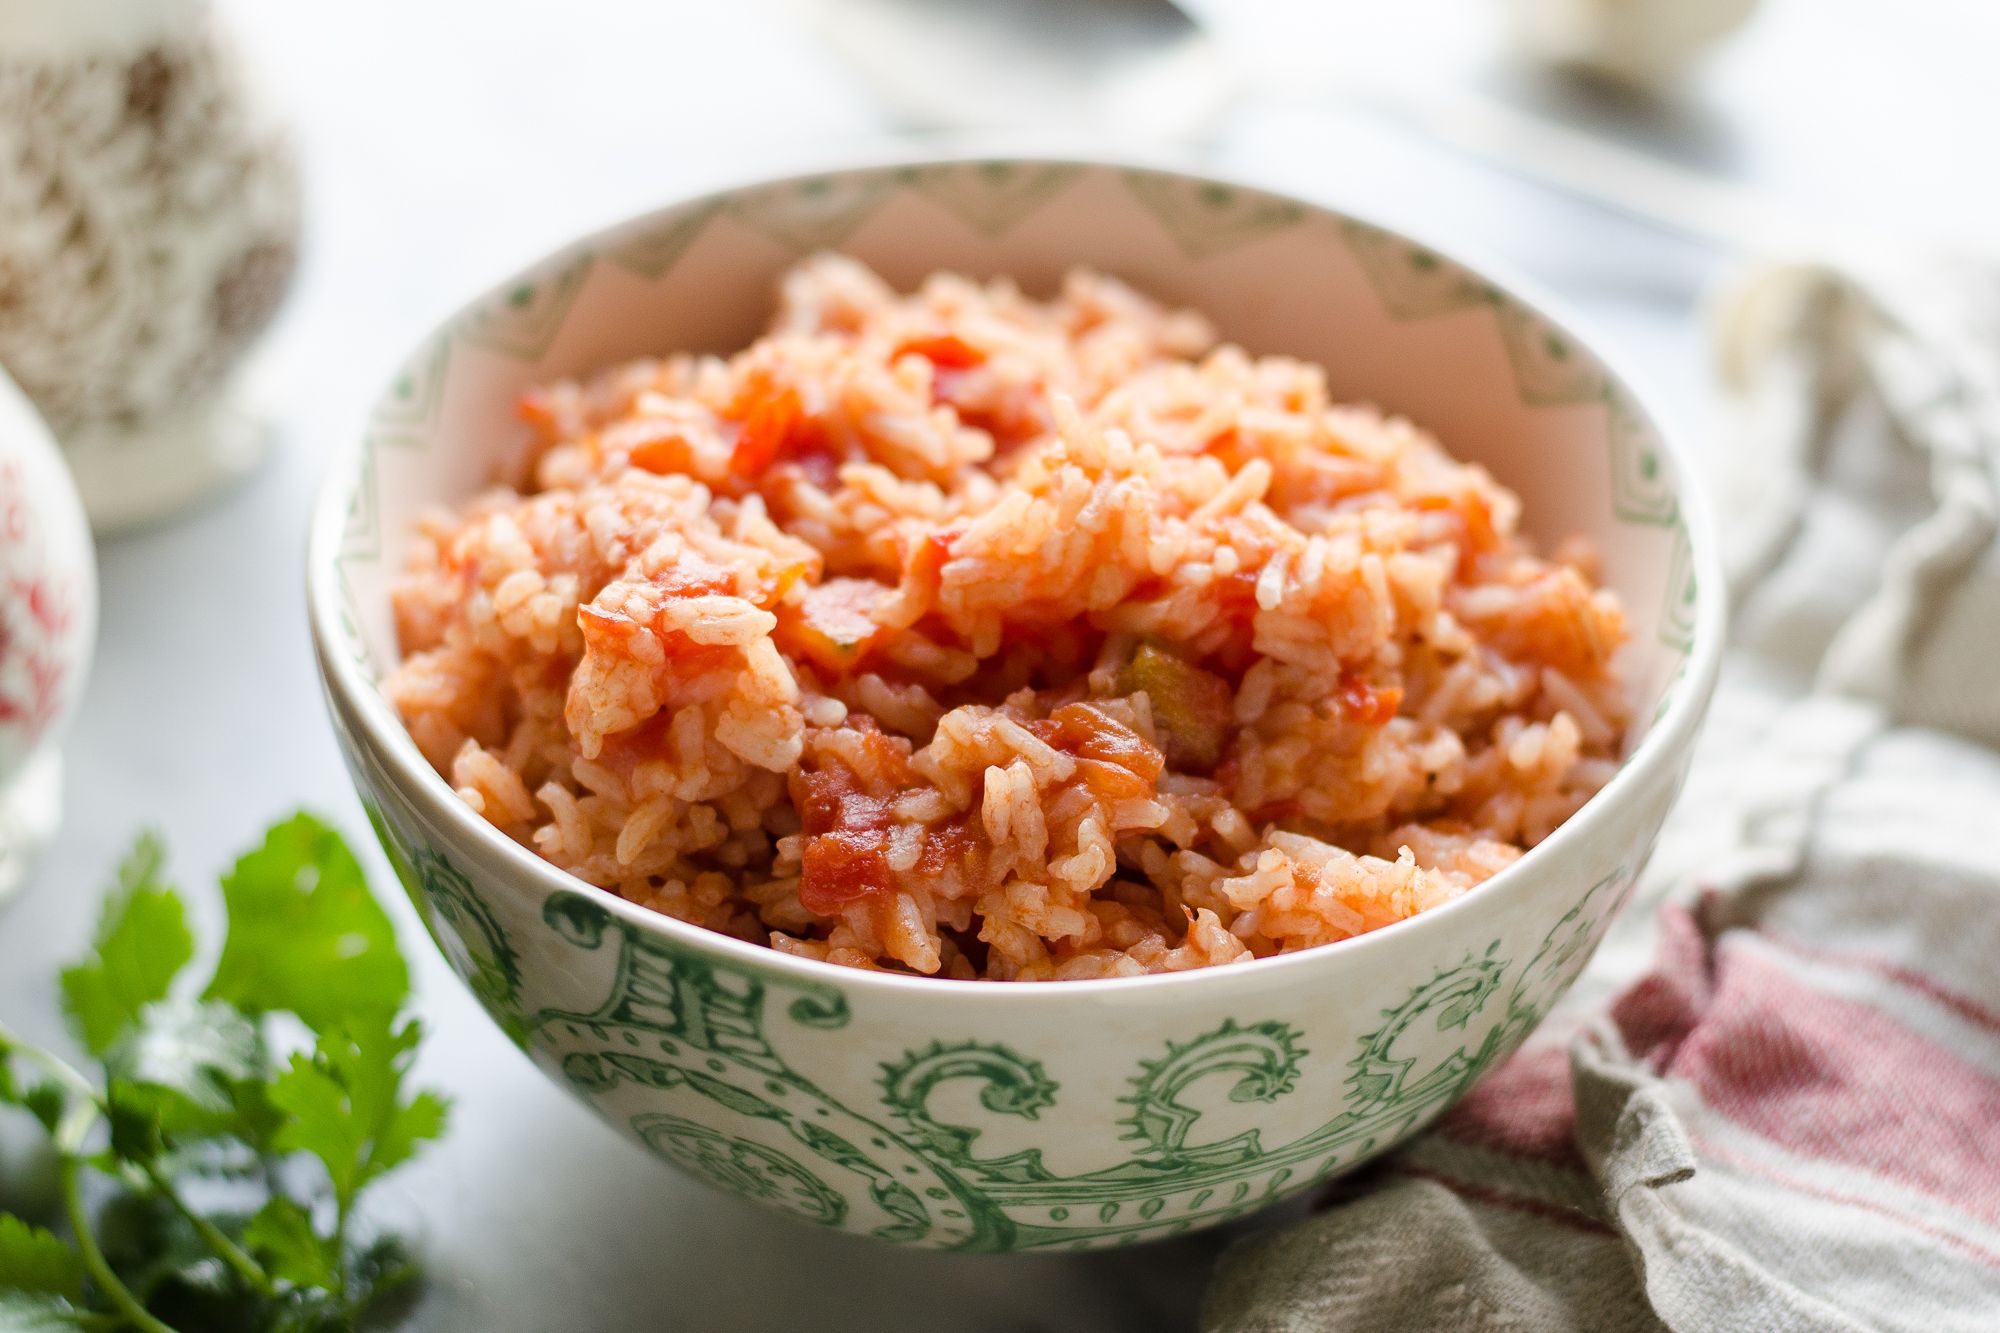 https://hips.hearstapps.com/thepioneerwoman/wp-content/uploads/2017/05/how-to-make-rice-without-a-rice-cooker-15.jpg